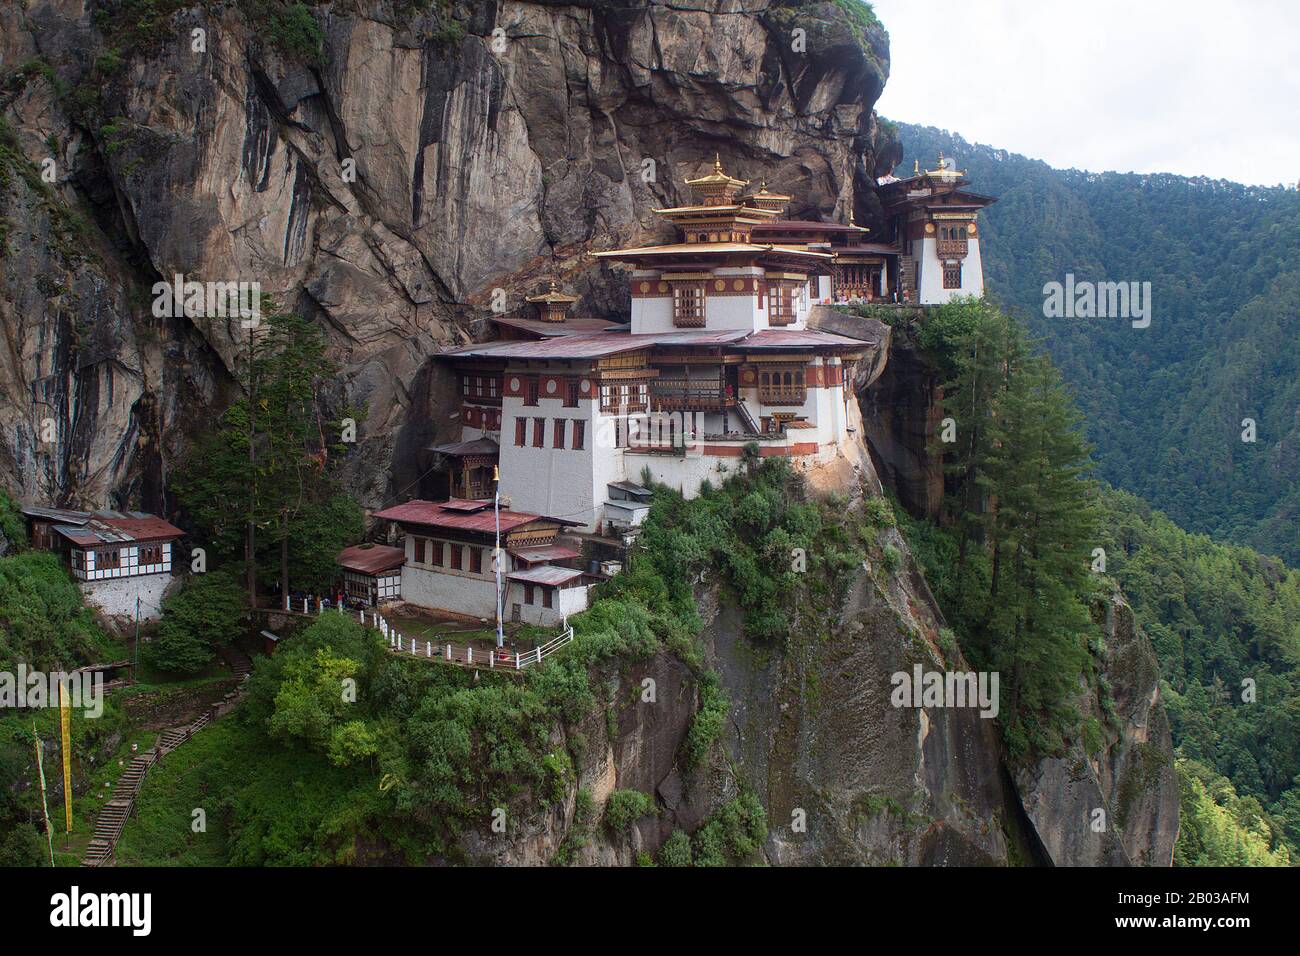 Paro Taktsang, also known by the names Taktsang Palphug Monastery and the Tiger's Nest, is a major Buddhist sacred site and temple complex built into the 1,000-metre (3,281-foot) cliffside of the upper Paro valley in Bhutan. Stock Photo